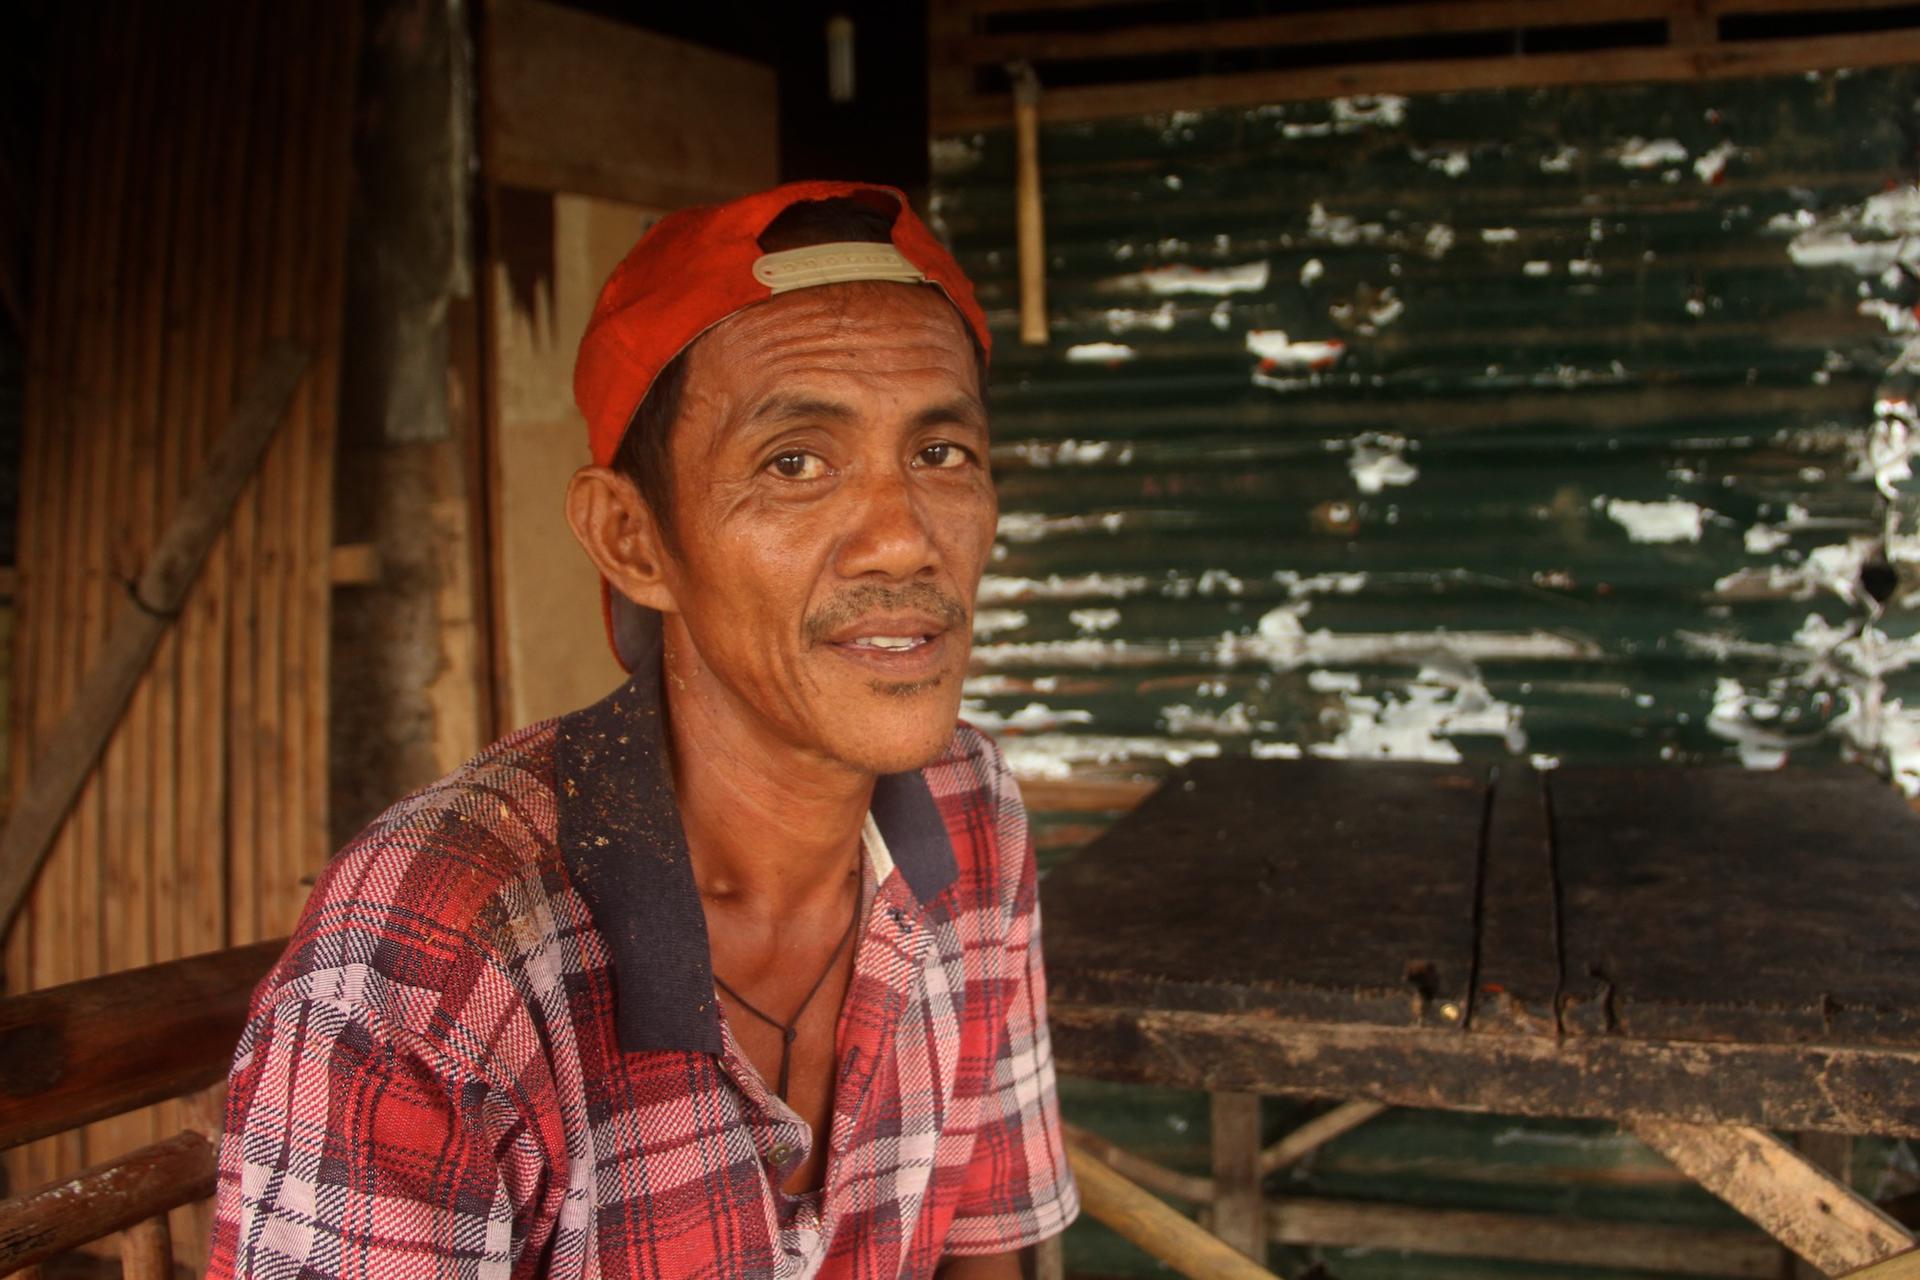 Farmer Felipe Parado Jr., 59, has collected the sap of coconut palms, to make wine, since he was a child.